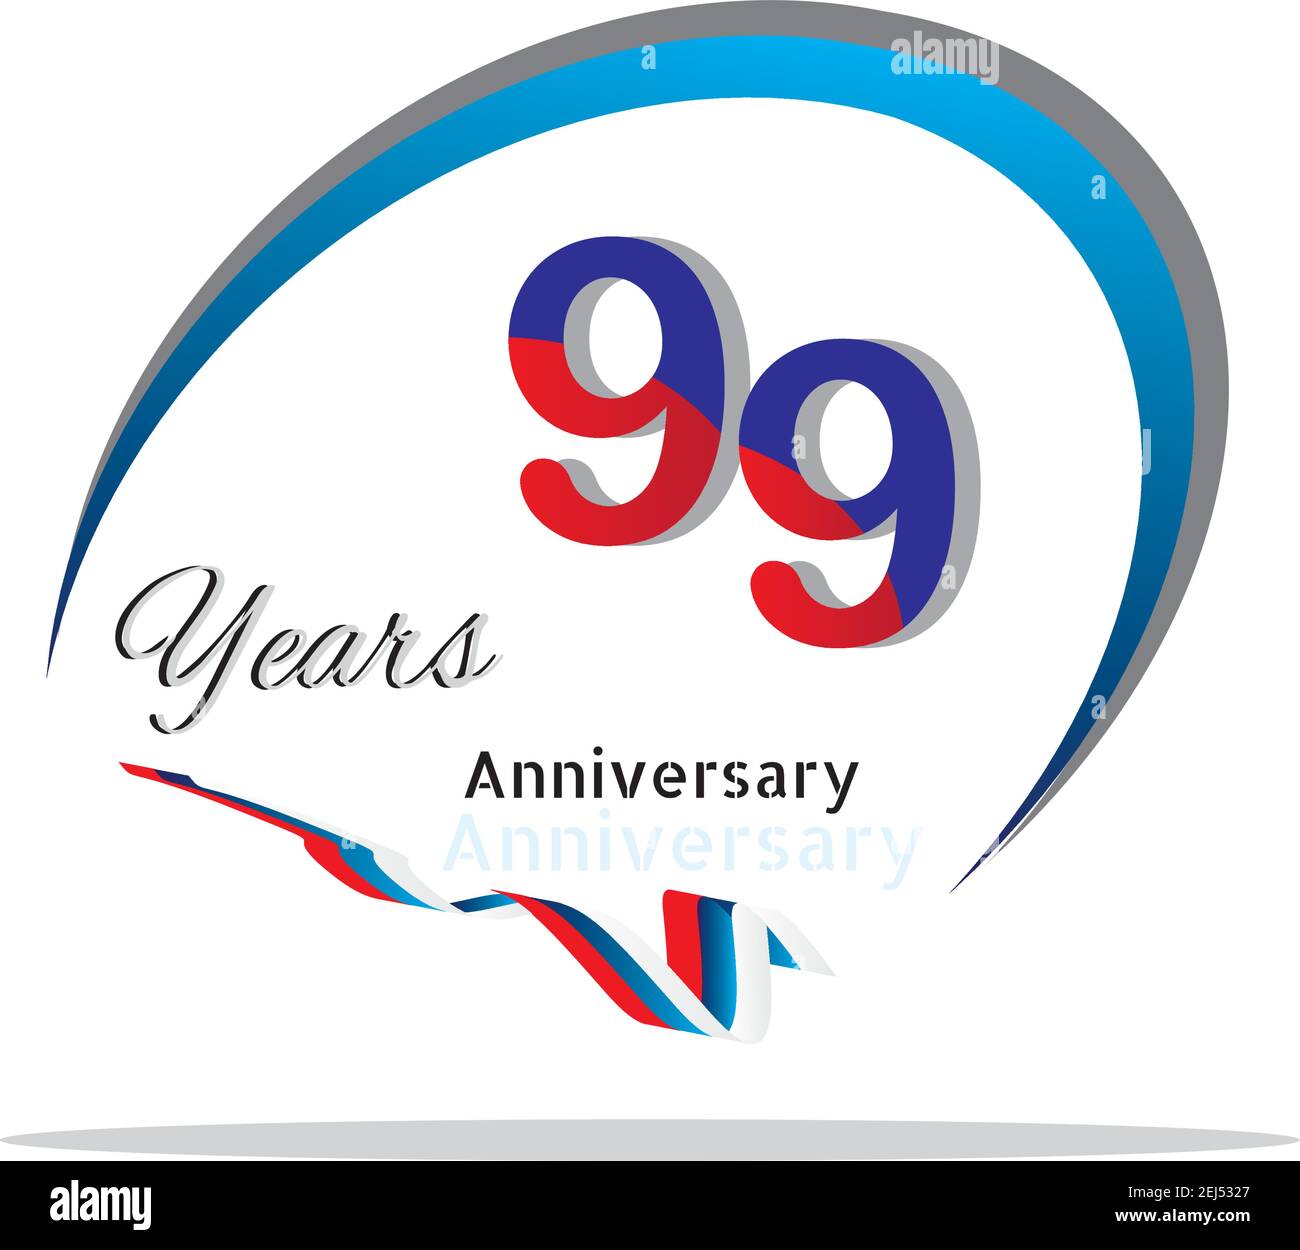 99 anniversary celebration logotype green and red colored. seventy eight years birthday logo on white background. Stock Vector